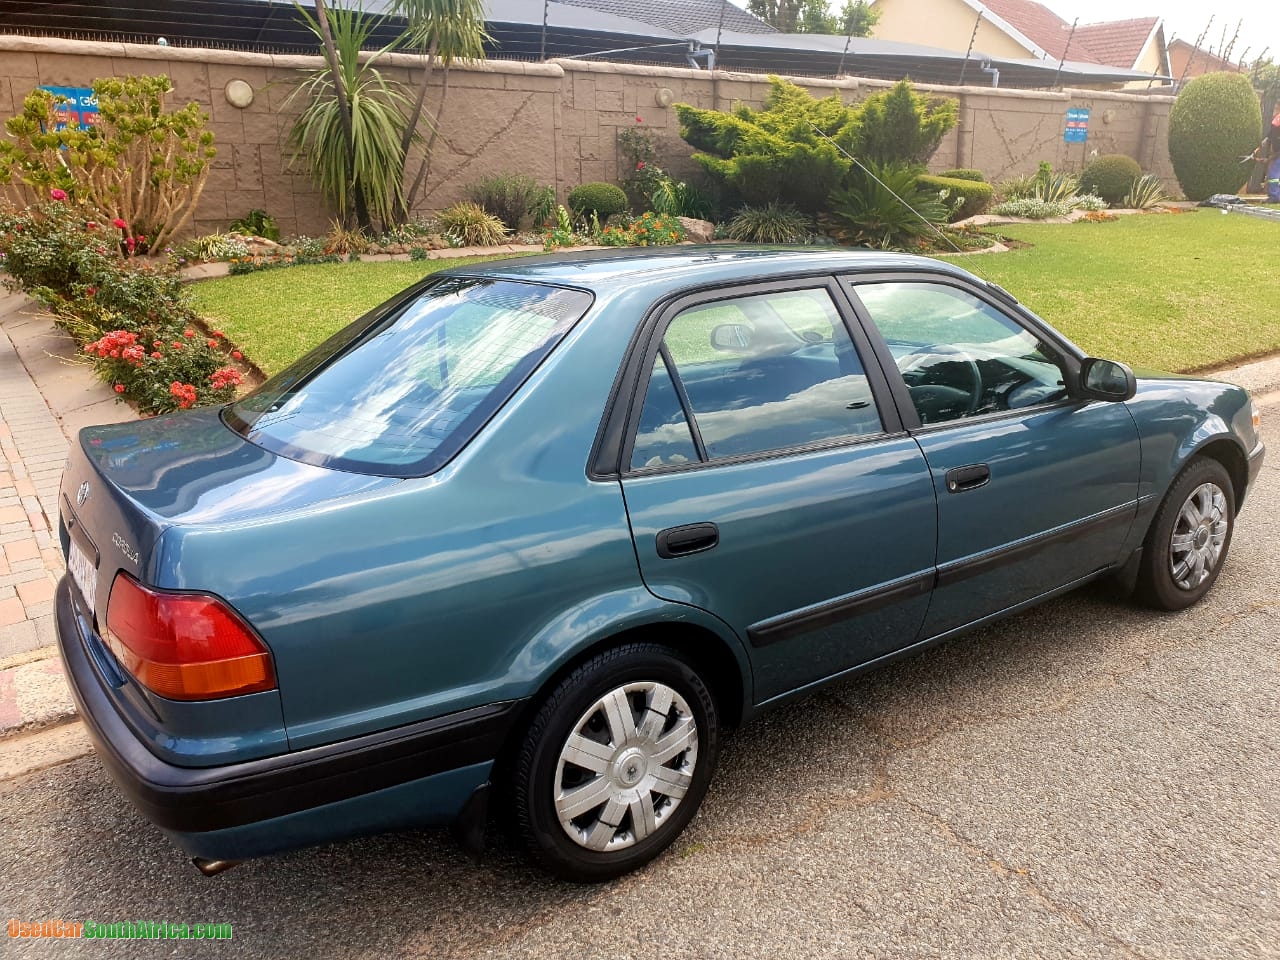 2000 Toyota Corolla 1.6 Rxi used car for sale in